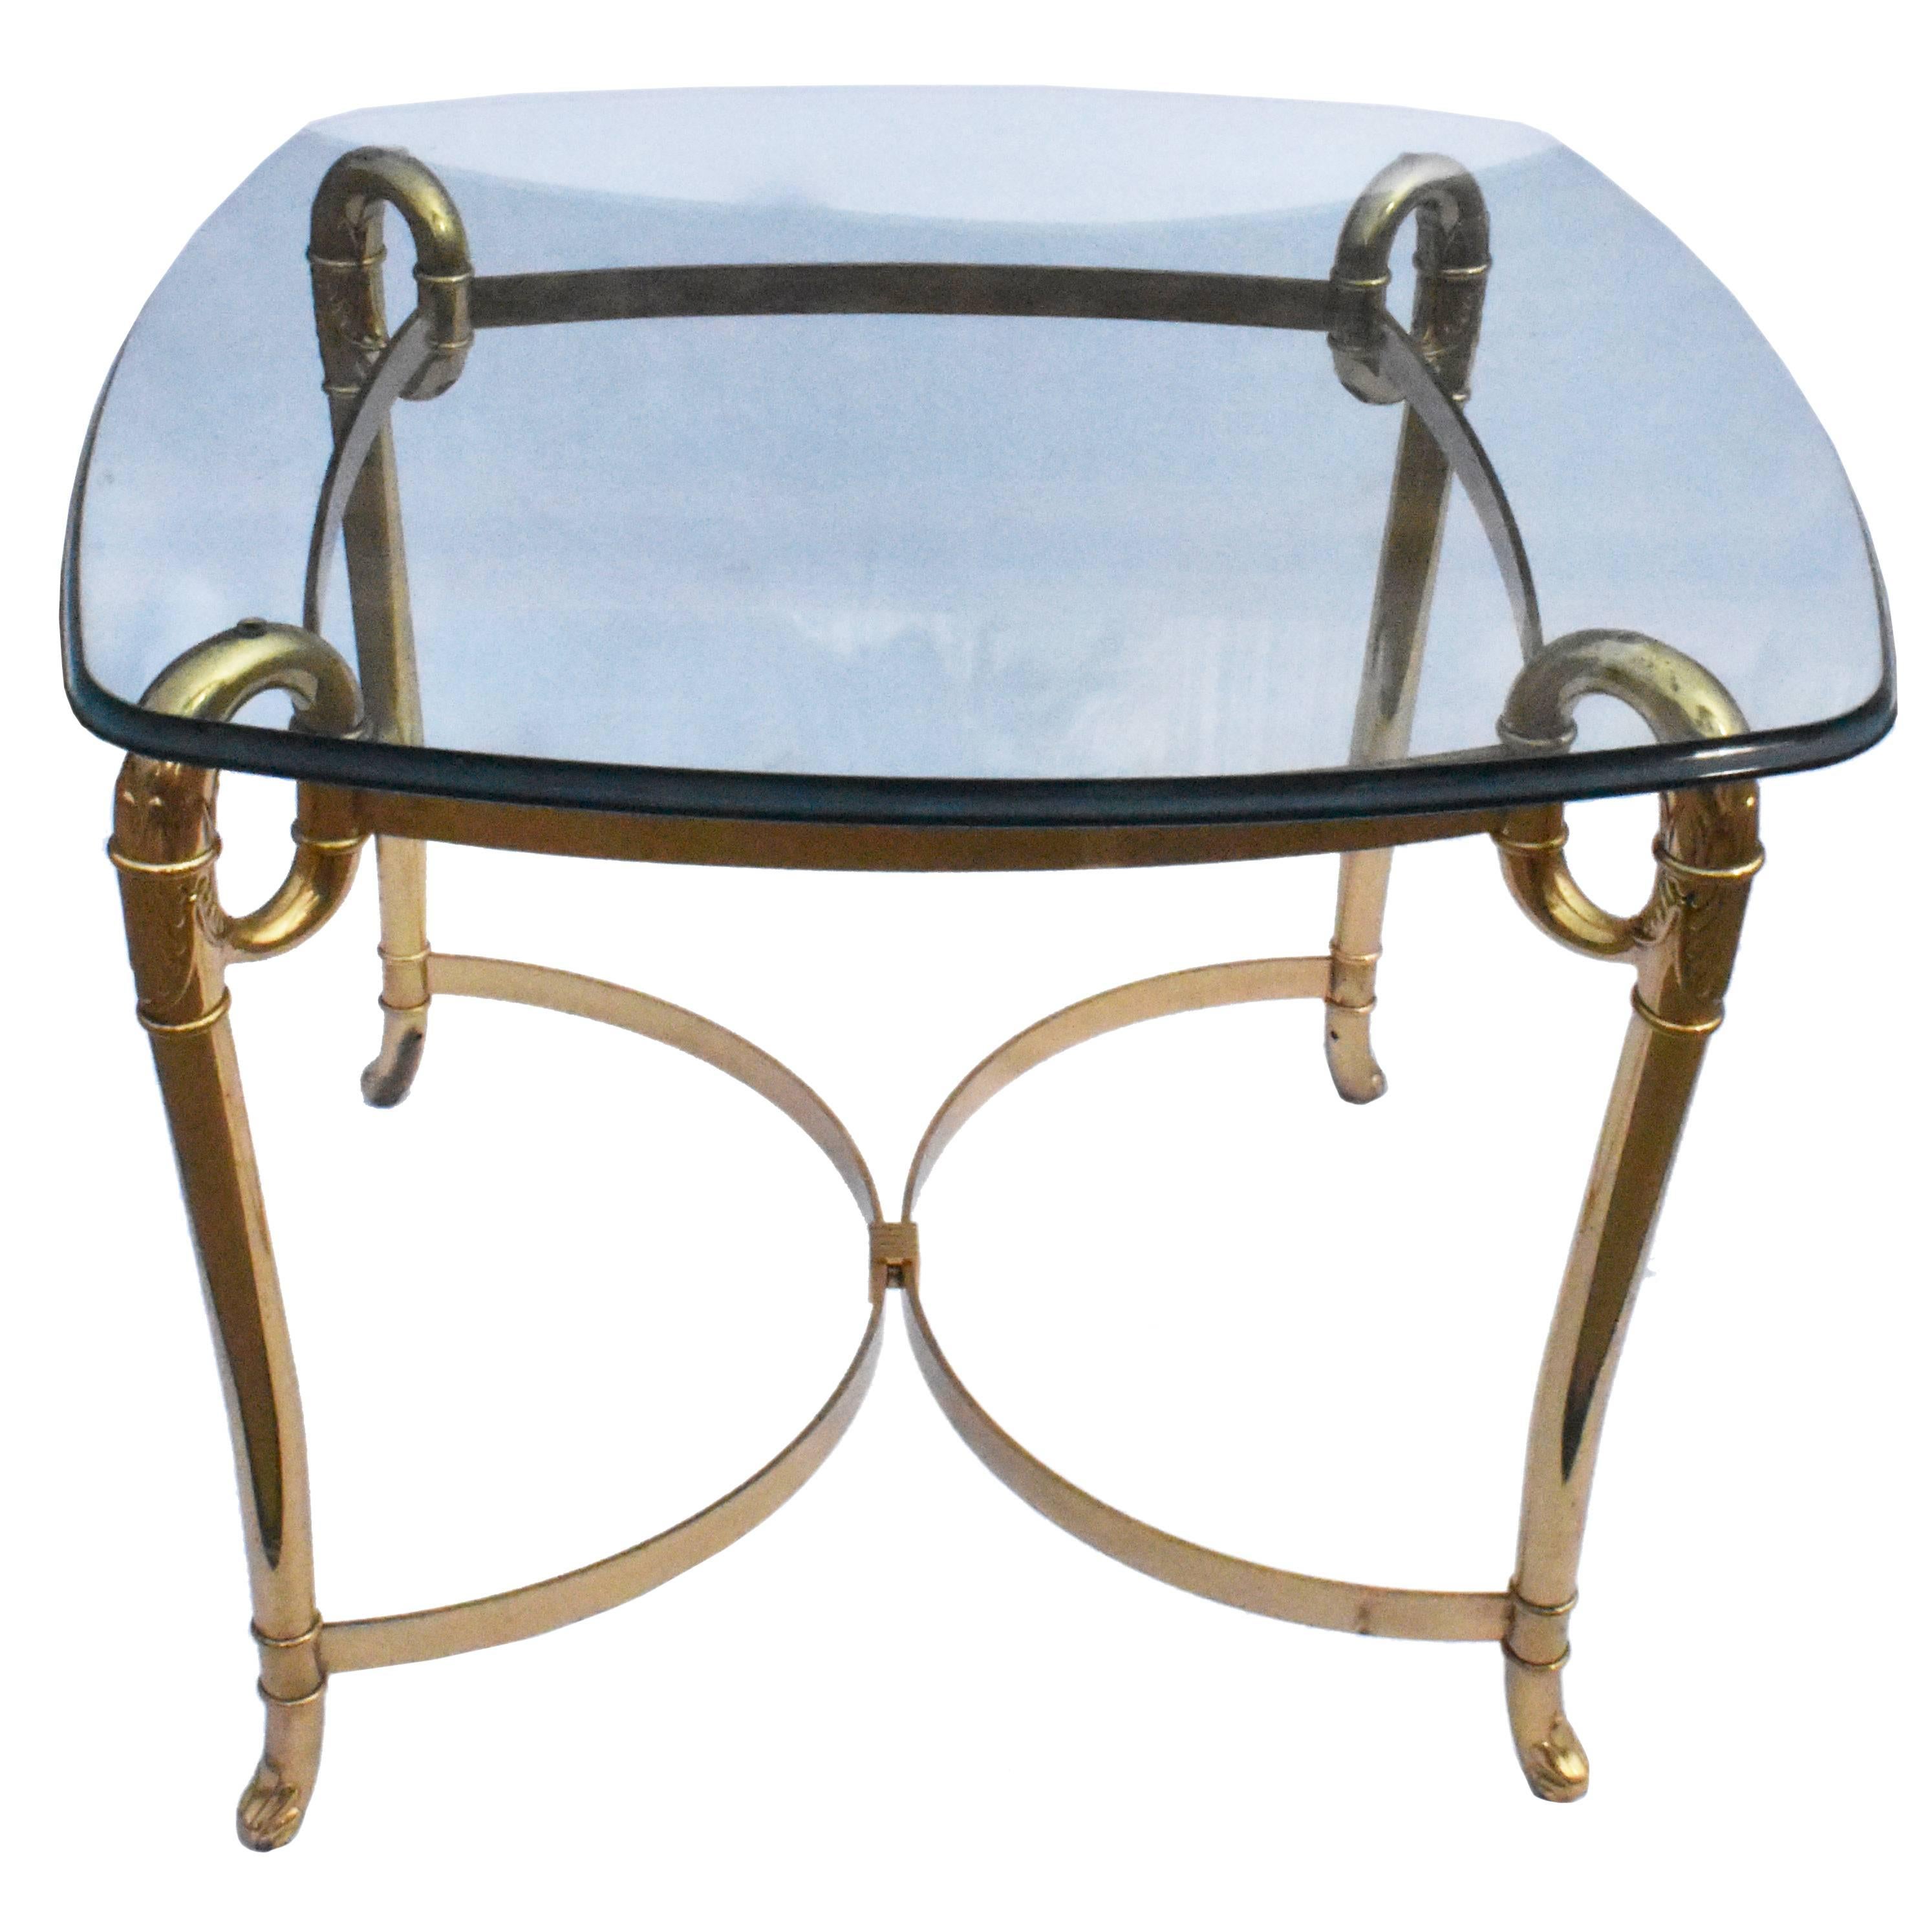 Italian, 1980s rectangular tables with gilded bronze bases and smoked glass tops.